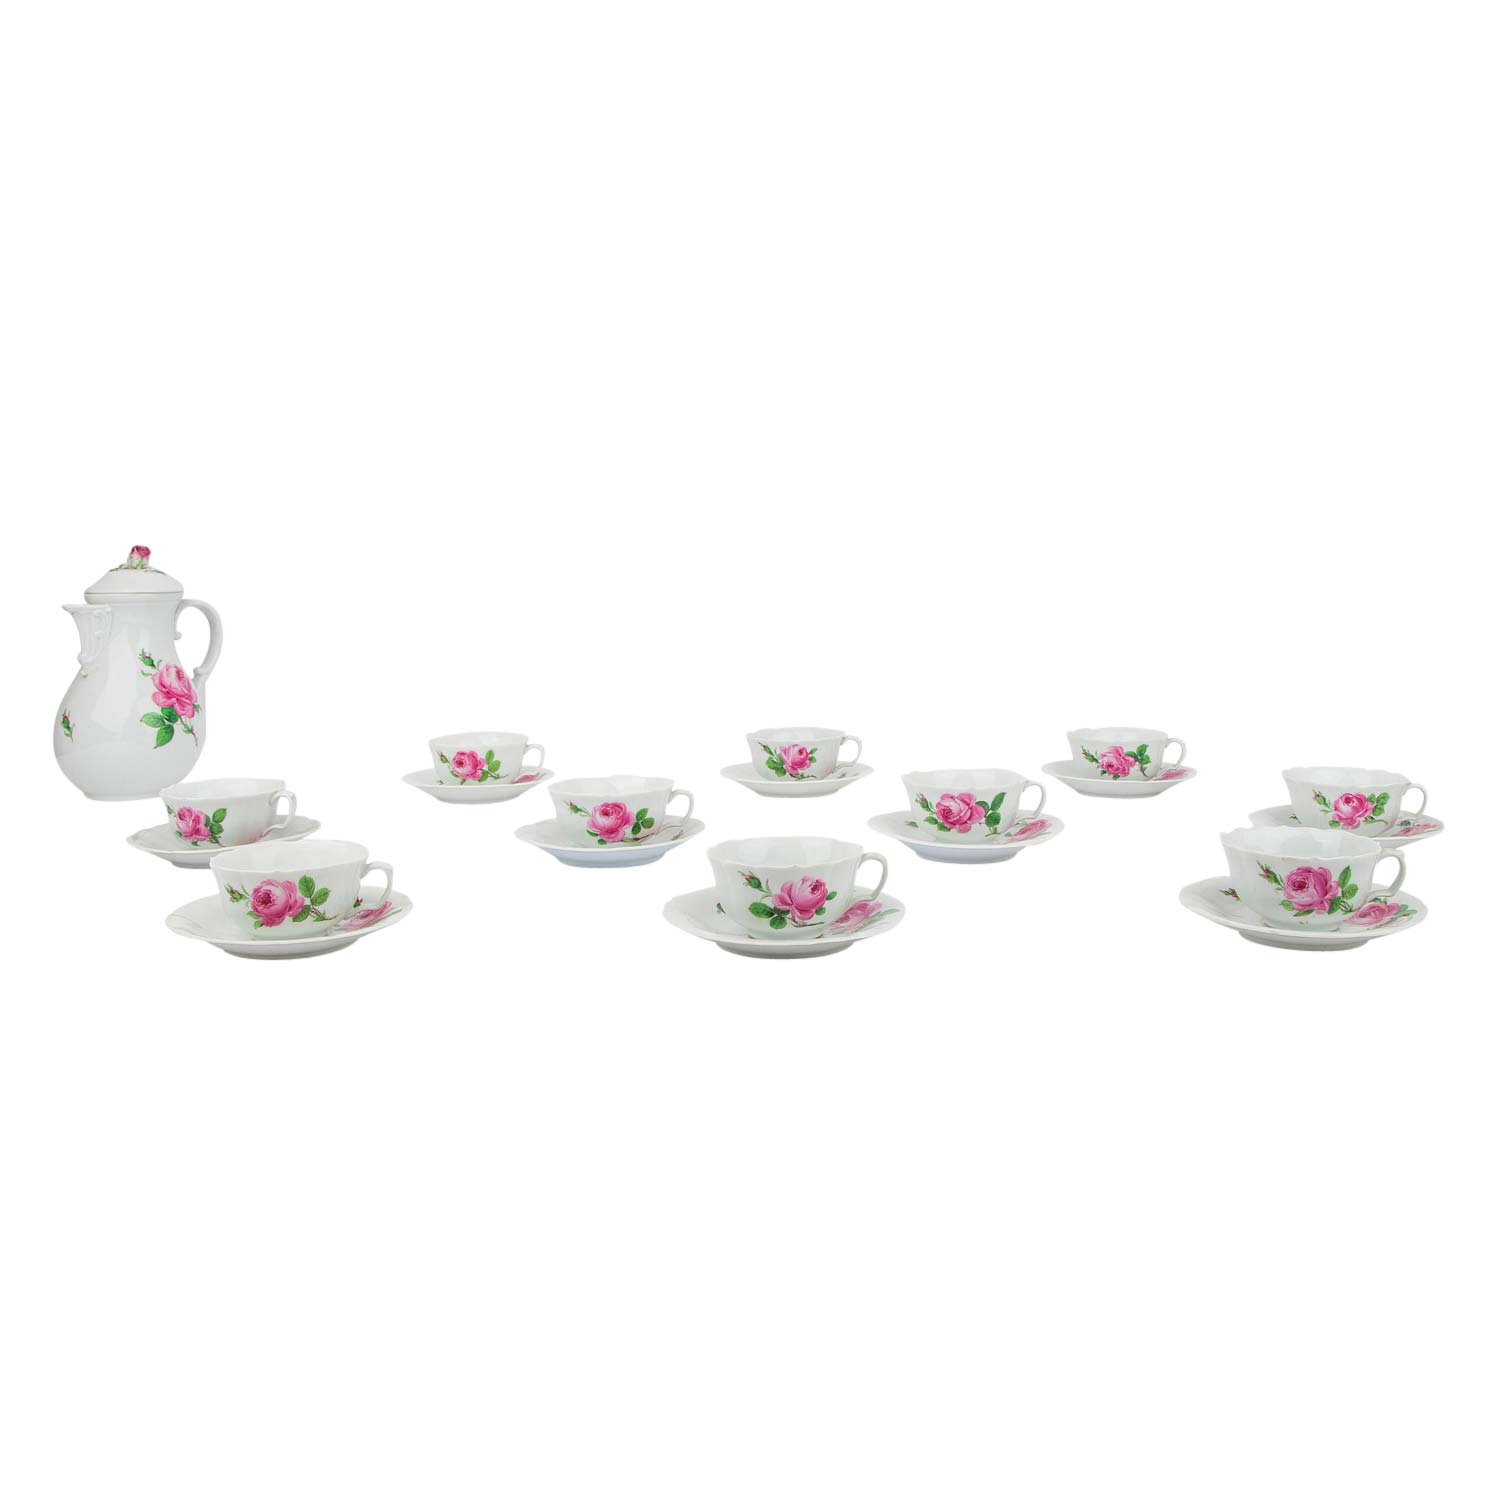 MEISSEN Kaffeeservice f. 10 Personen 'Rote Rose', 2. Wahl, 1924-1934. - Image 3 of 6